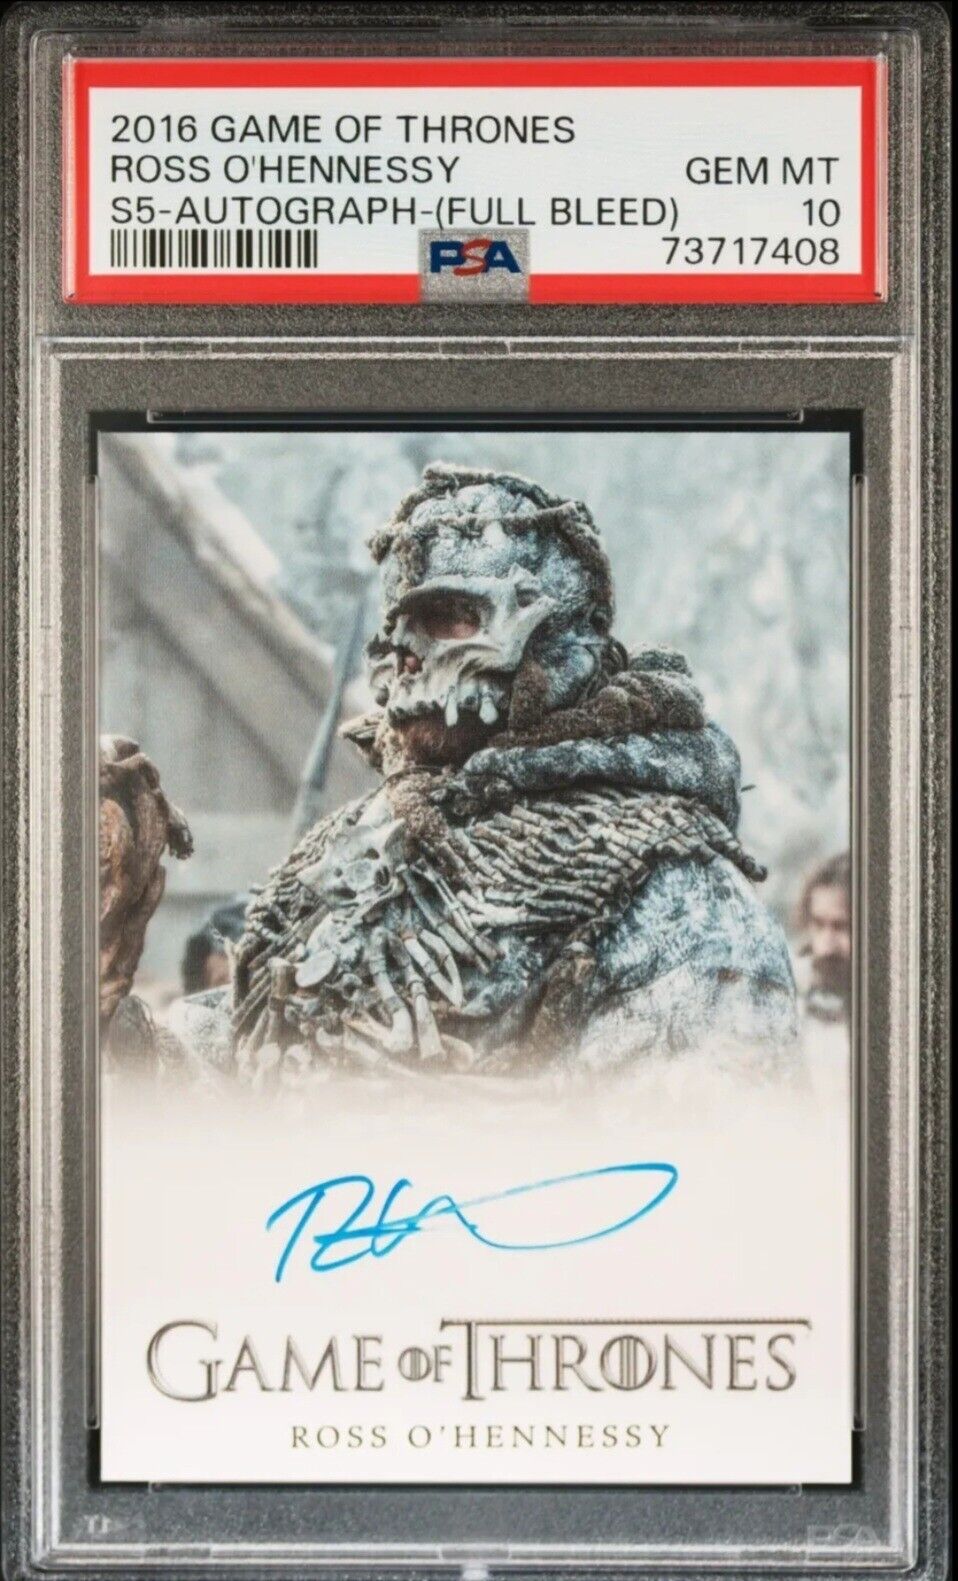 2016 GAME OF THRONES AUTOGRAPH FULL BLEED ROSS O\'HENNESSY PSA 10 